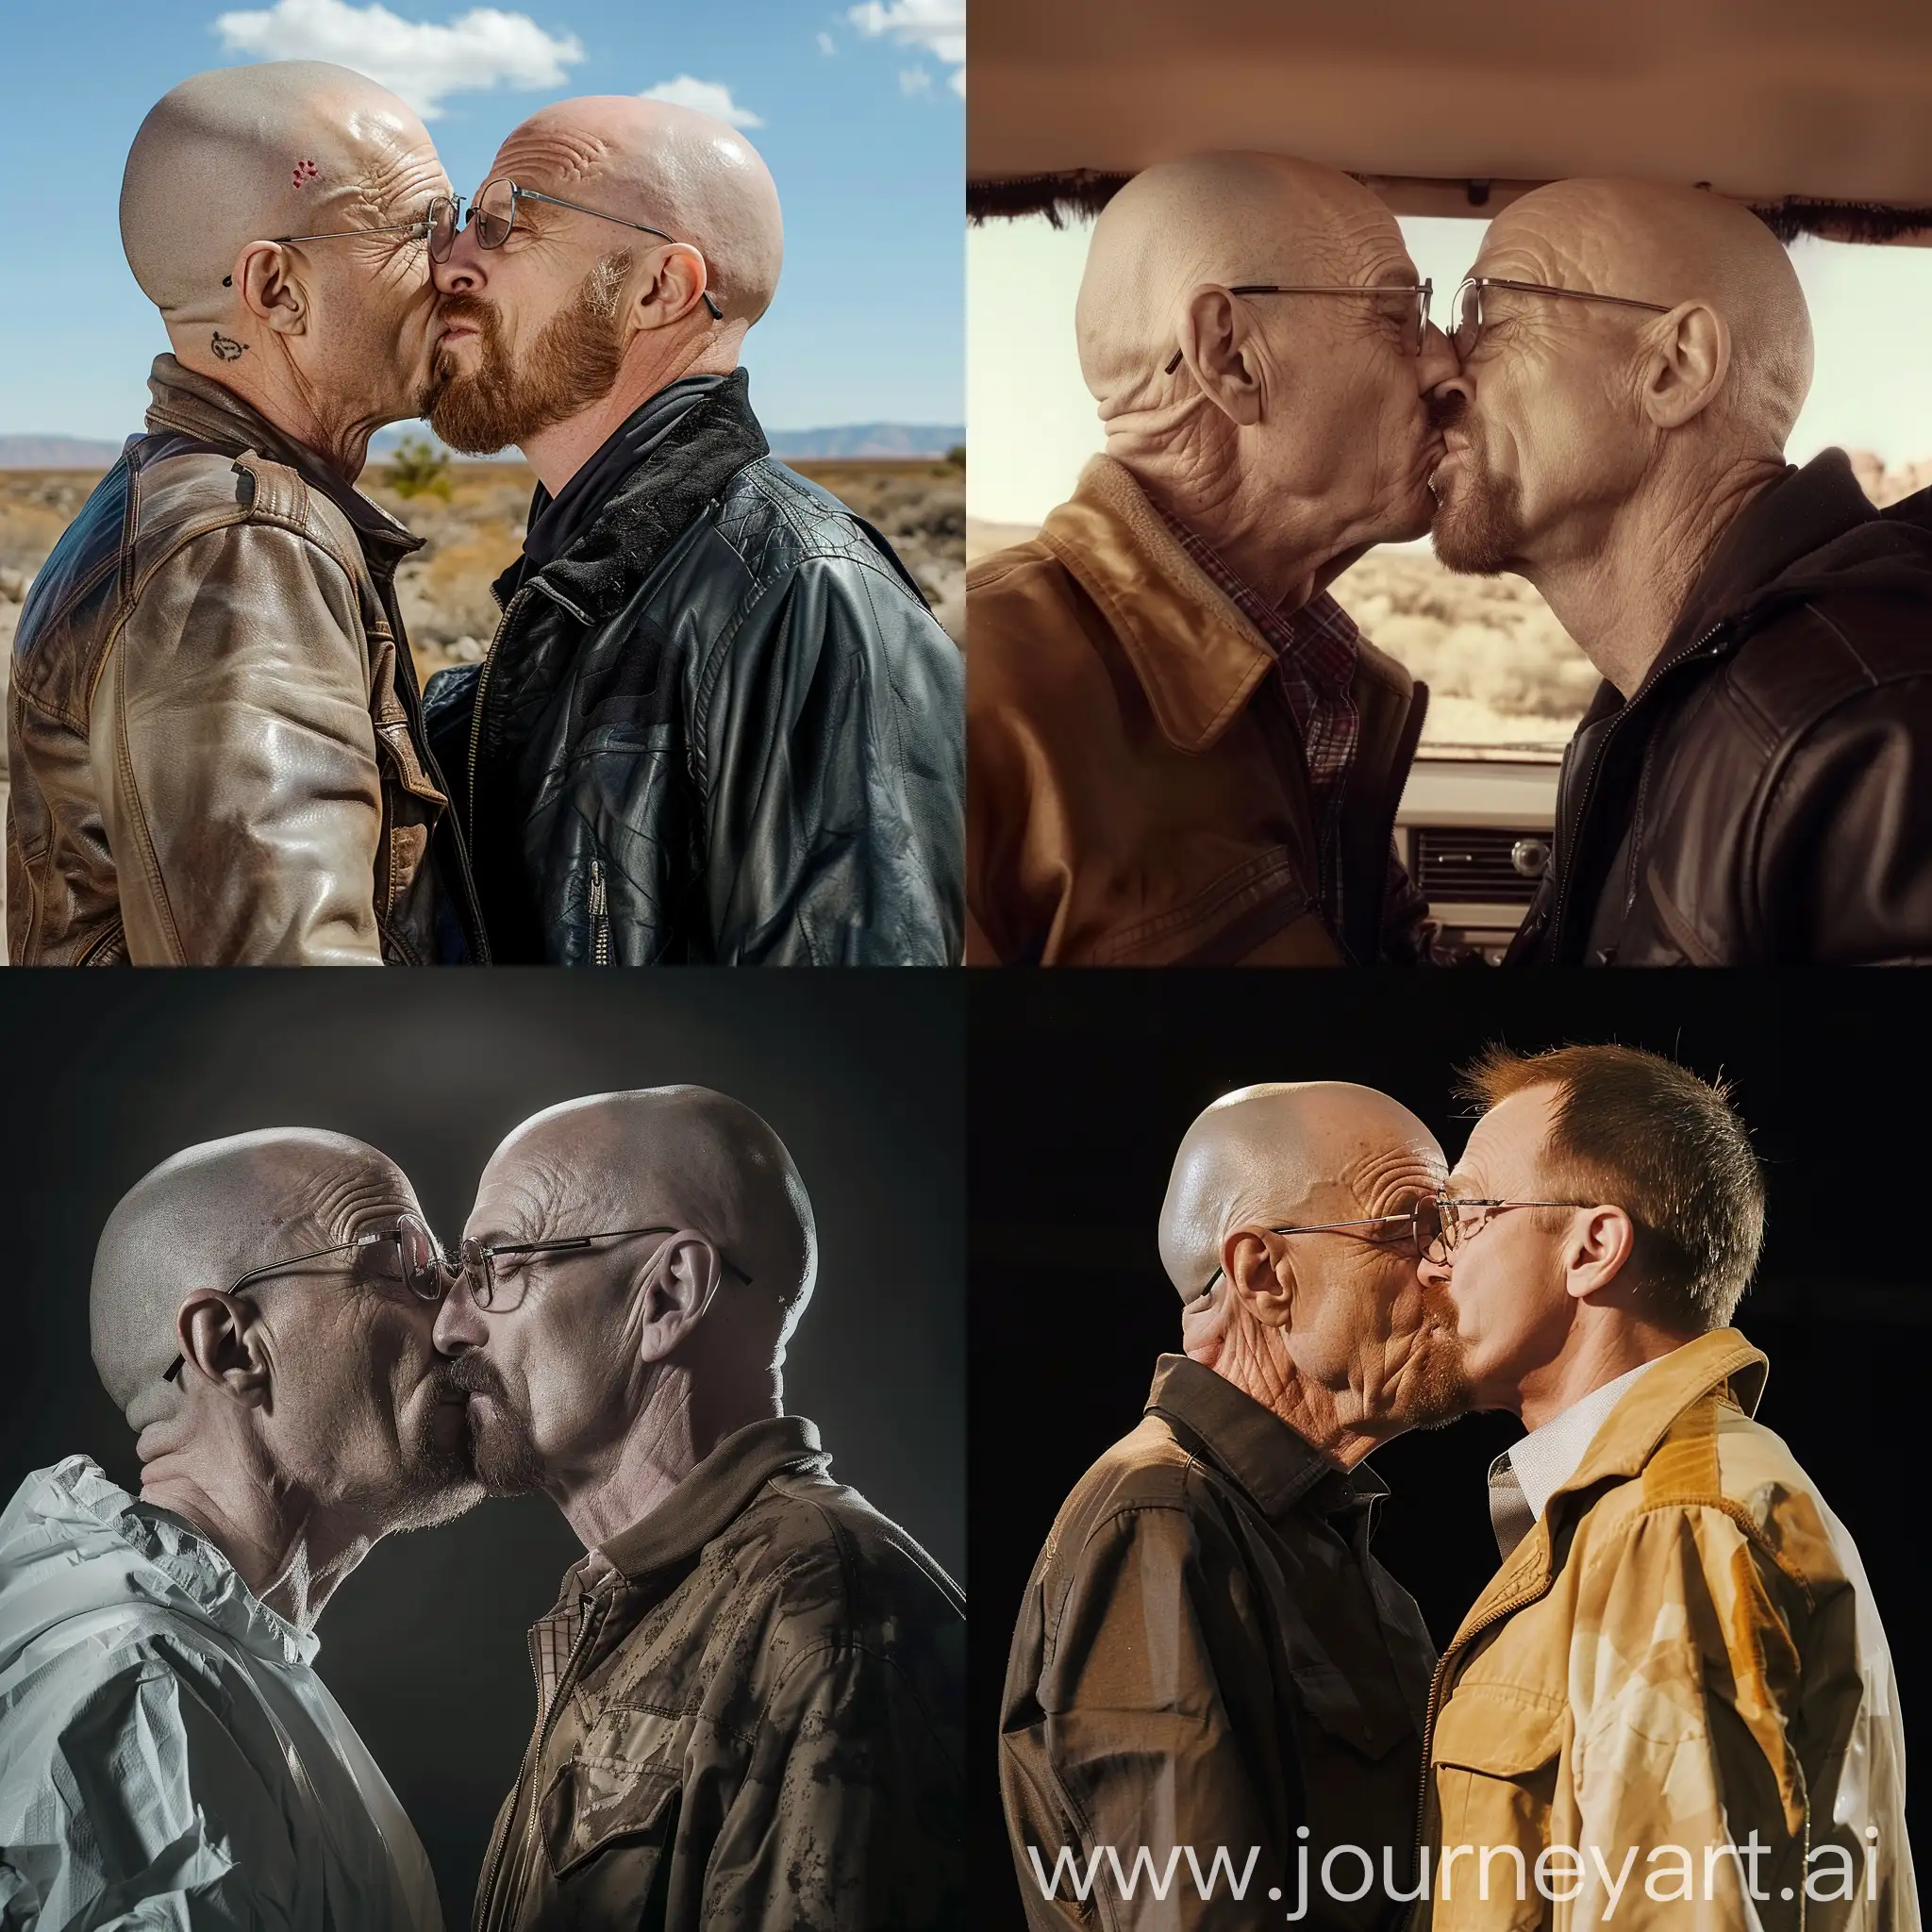 Walter-White-and-Jesse-Pinkman-Share-an-Emotional-Moment-in-Breaking-Bad-Tribute-Art